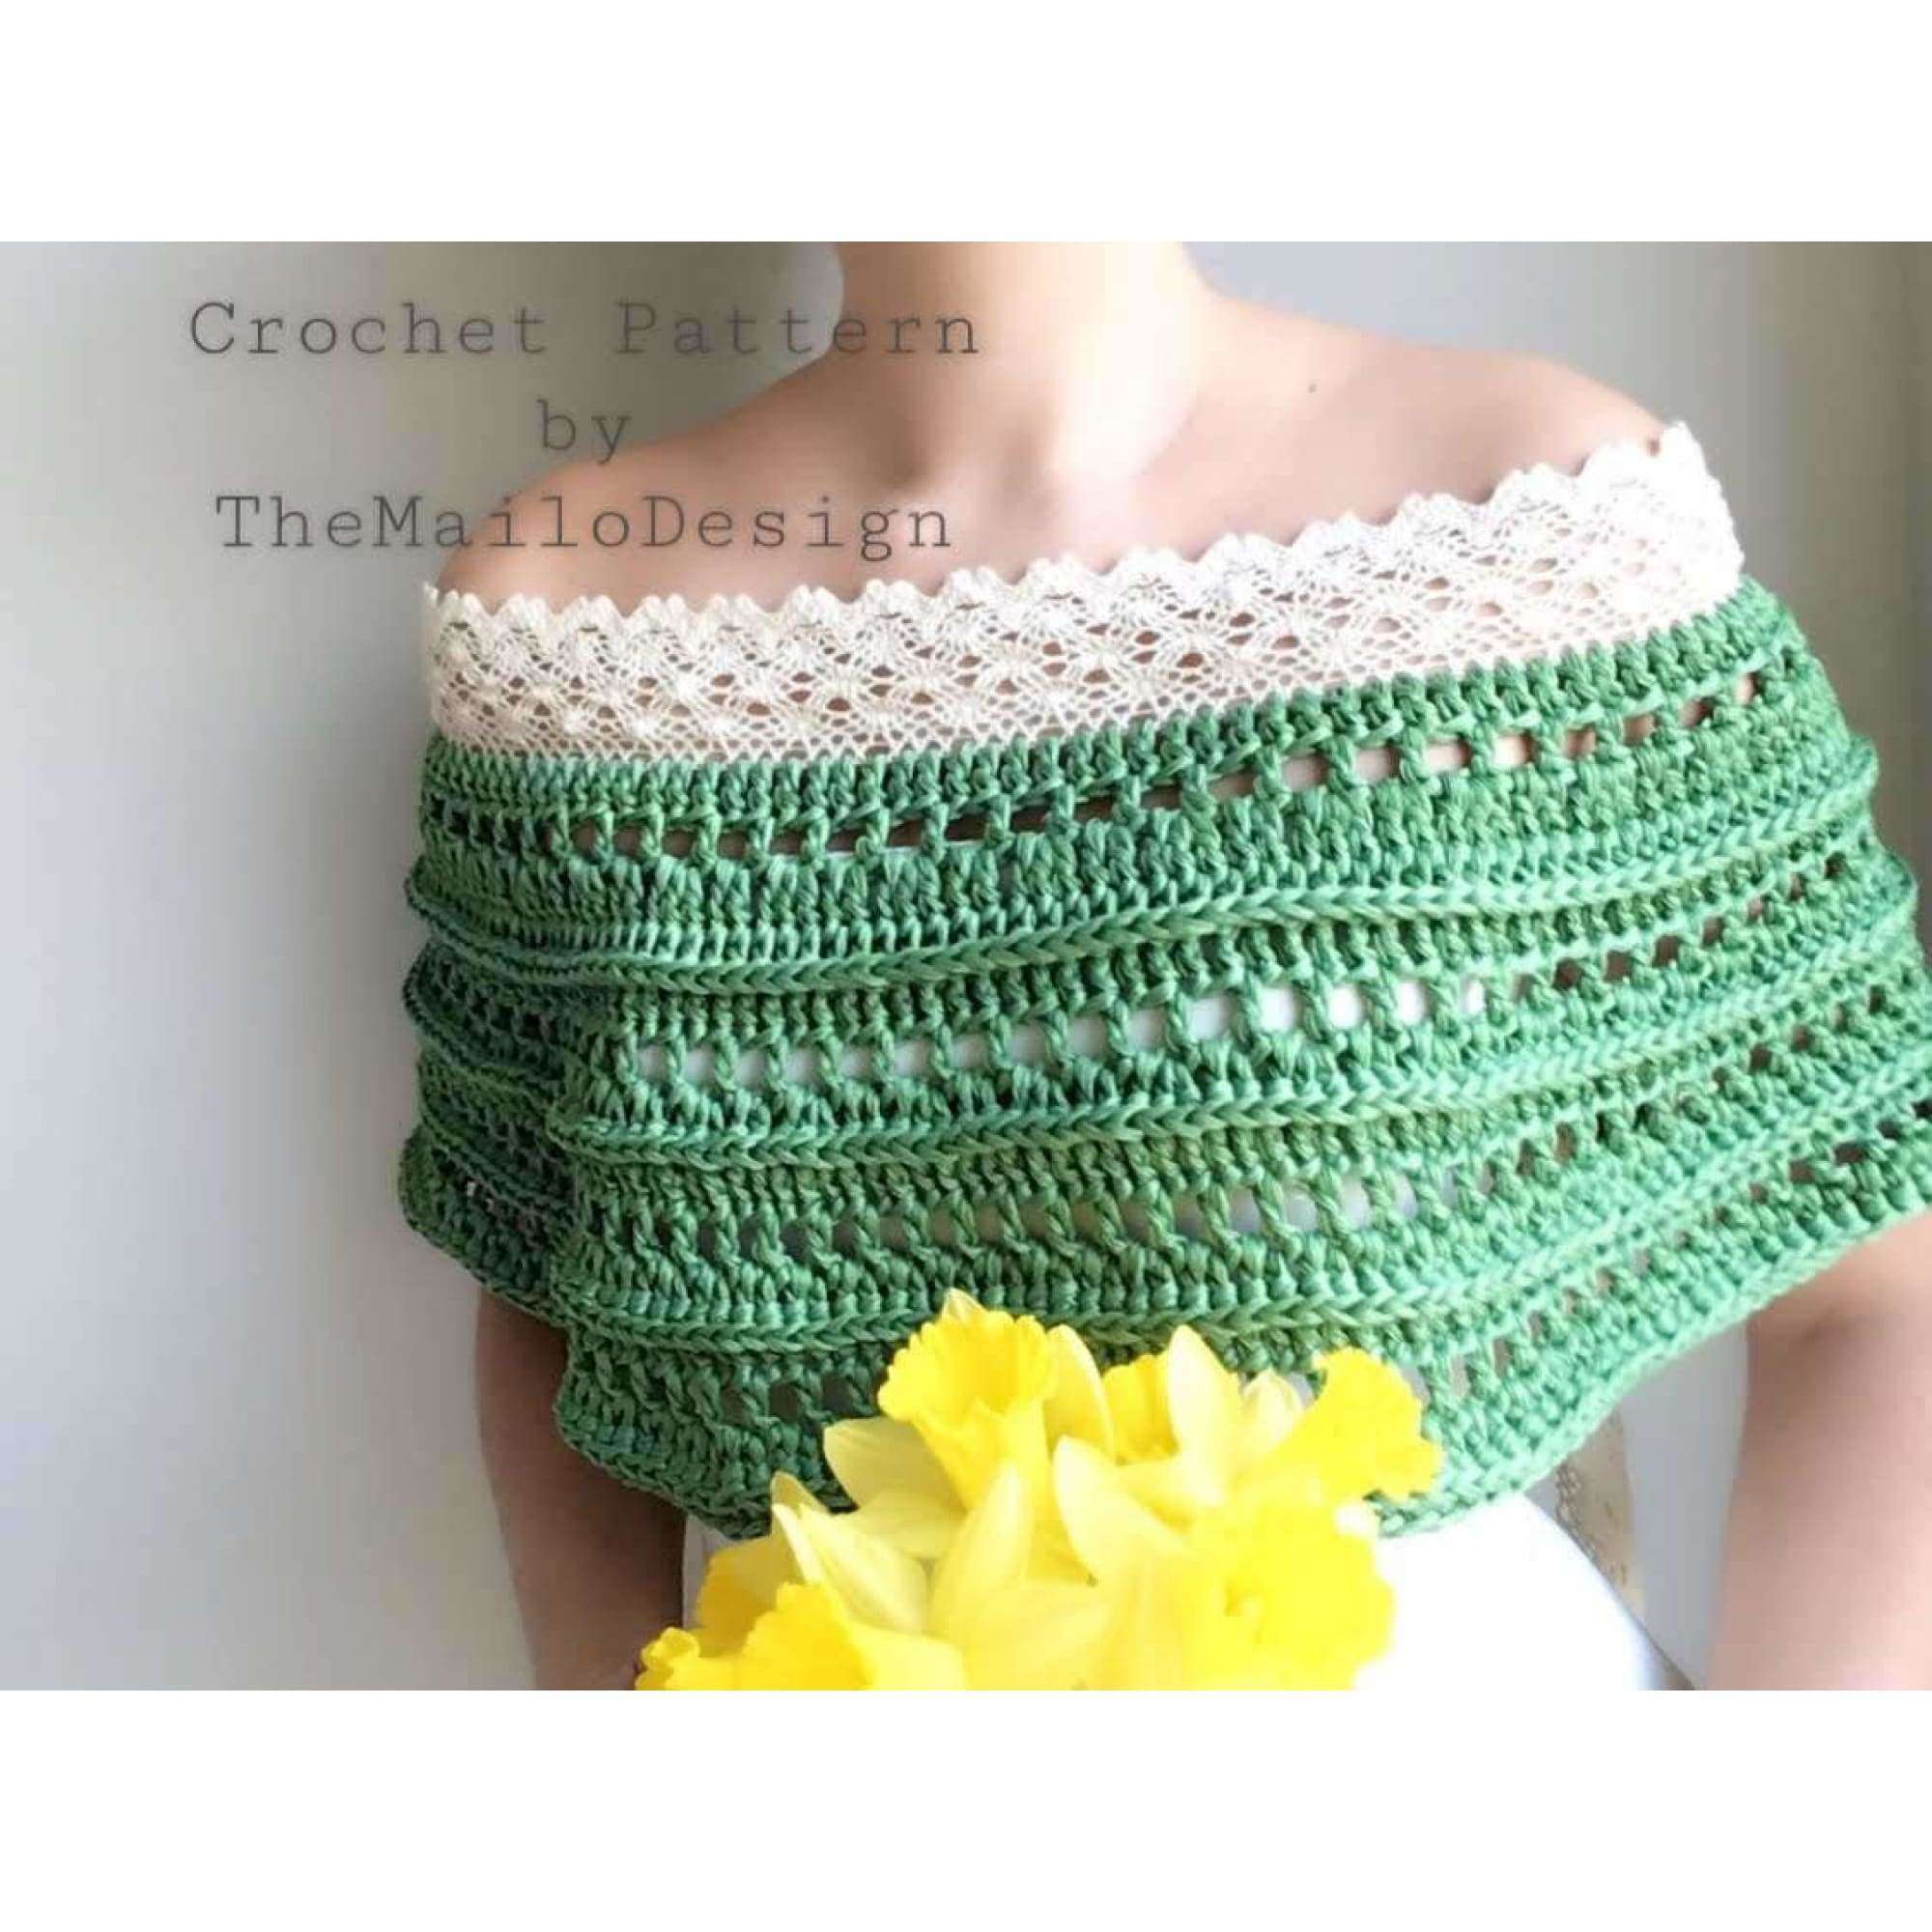 Crochet Wedding Cape Pattern - Narcissus Cape - TheMailoDesign - Sweaters, Cardigans & Capes - TheMailoDesign